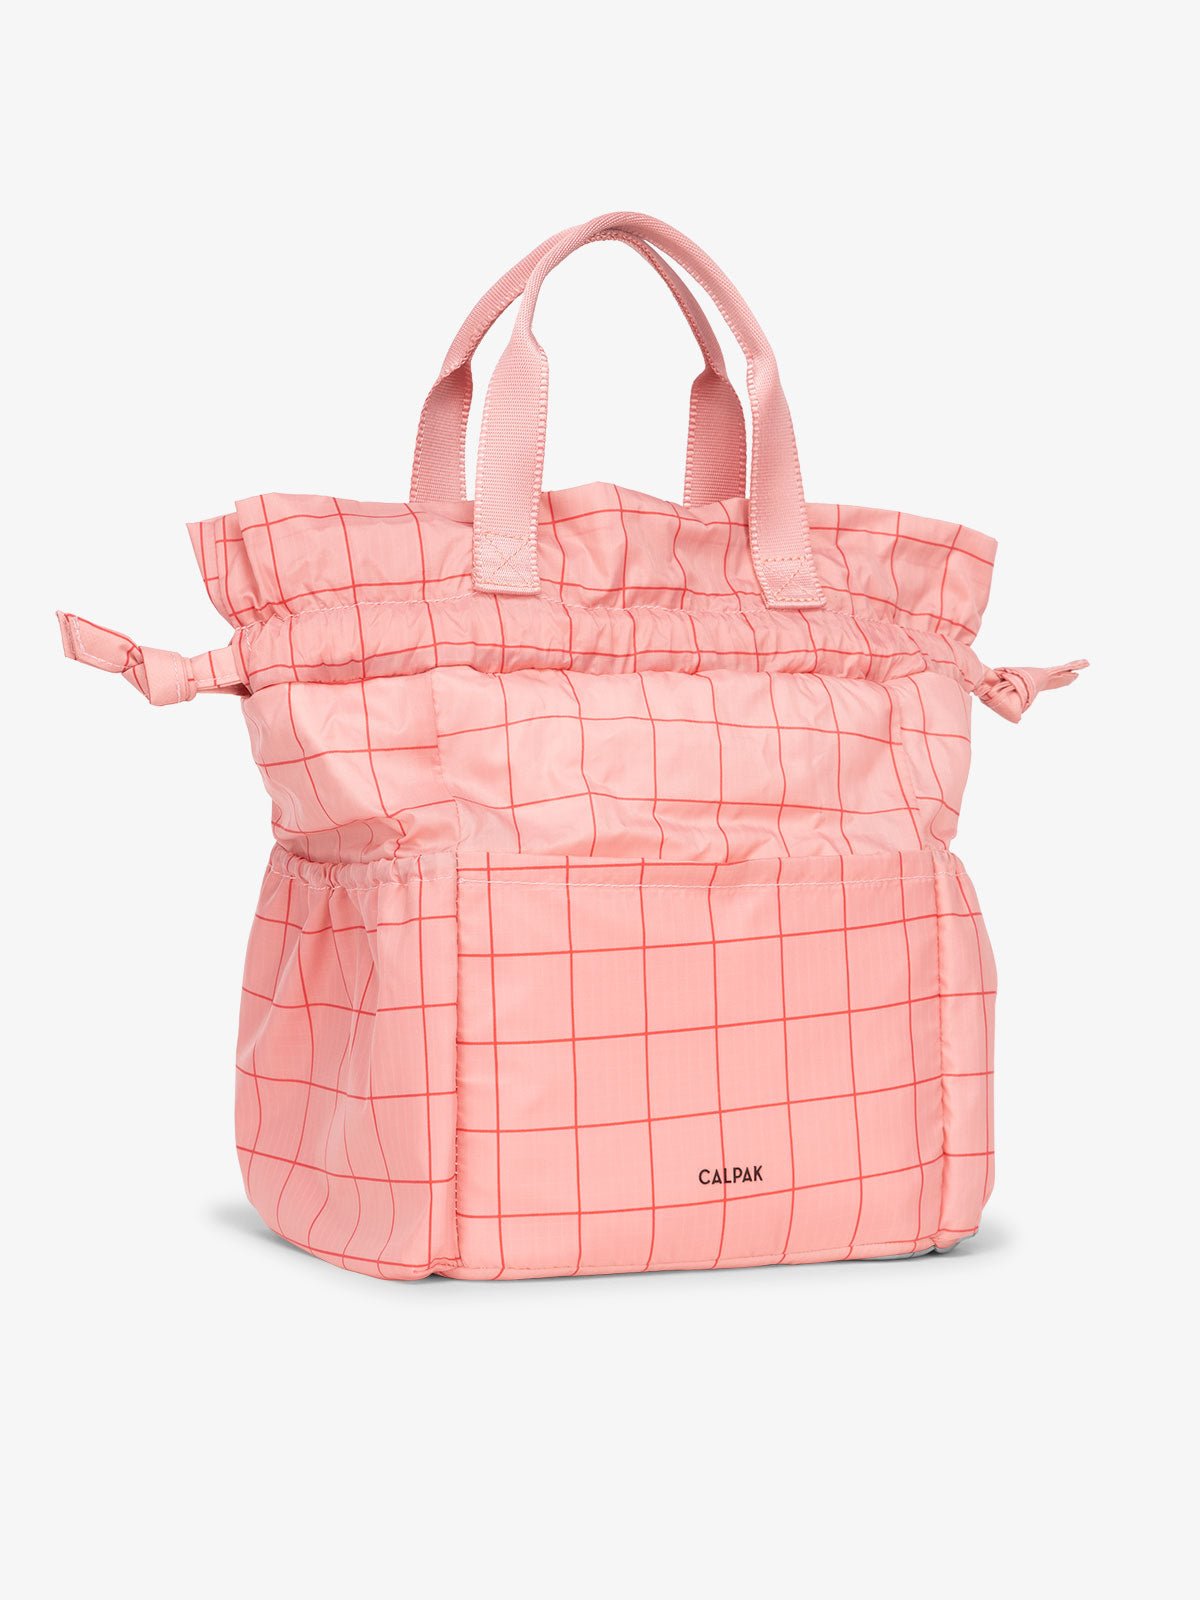 CALPAK Insulated Lunch Bag for men with multiple pockets and drawstring closure in pink grid